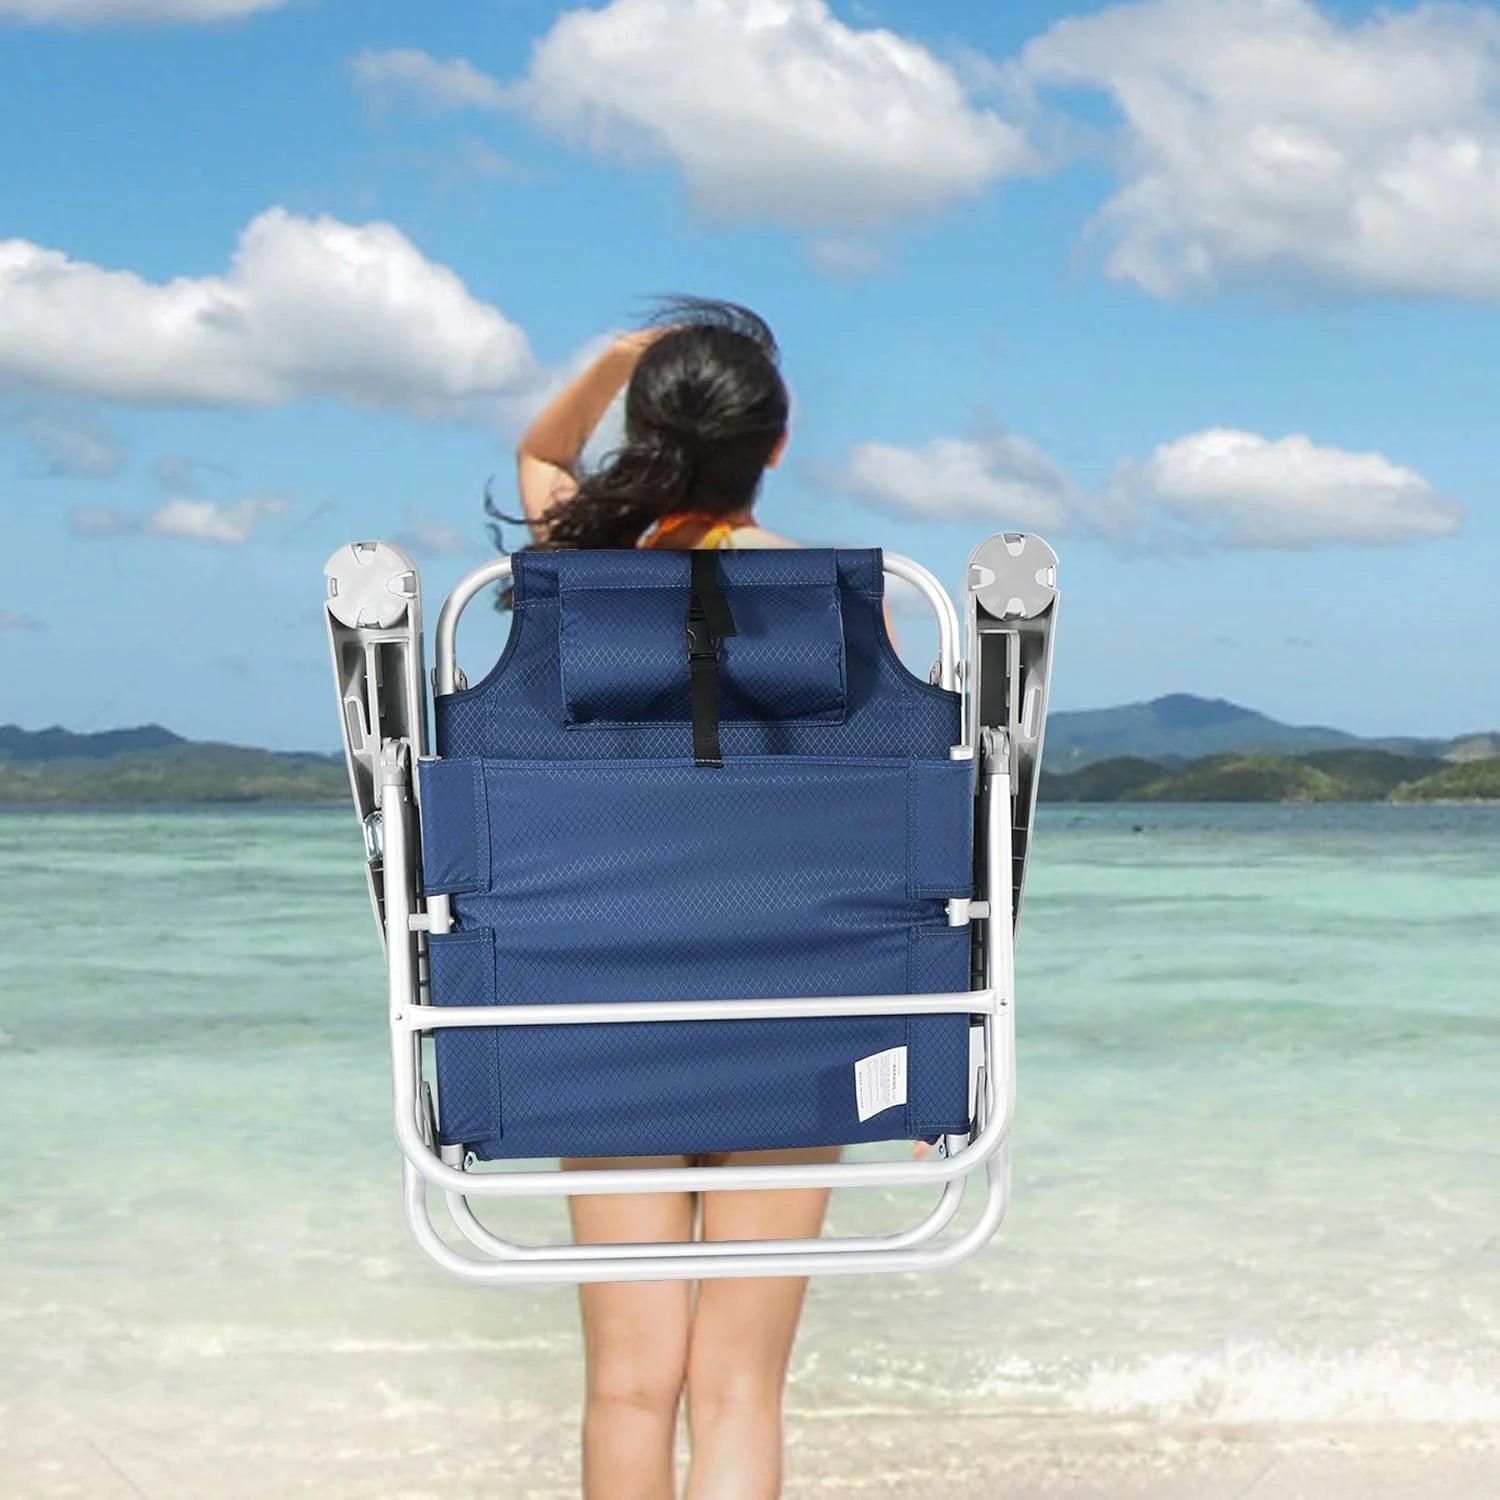 REDCAMP Portable Backpack Beach Chair